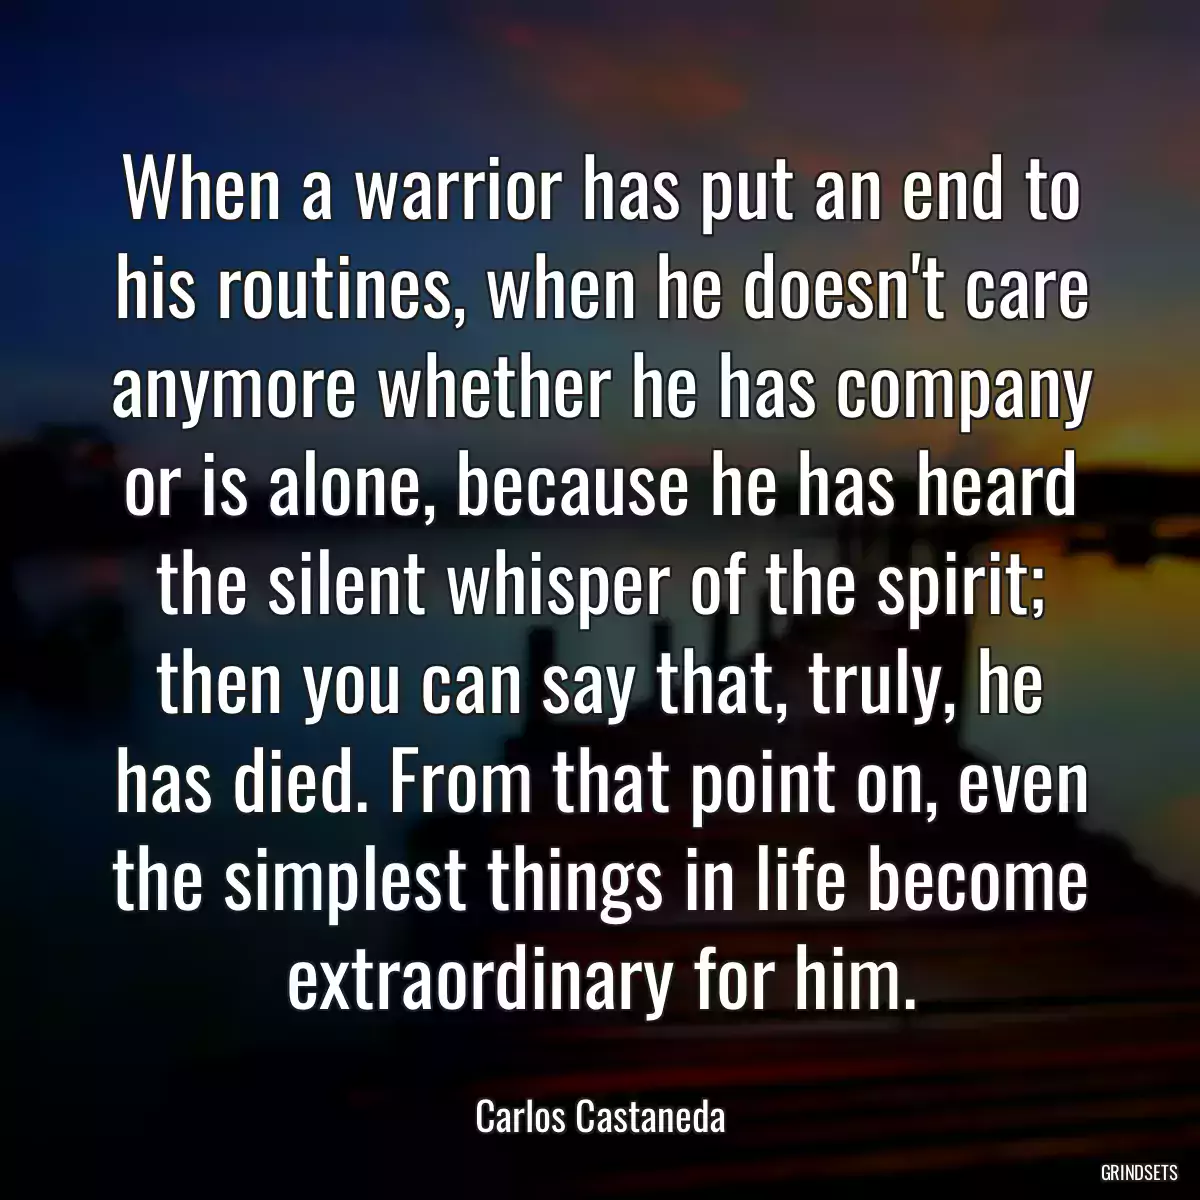 When a warrior has put an end to his routines, when he doesn\'t care anymore whether he has company or is alone, because he has heard the silent whisper of the spirit; then you can say that, truly, he has died. From that point on, even the simplest things in life become extraordinary for him.